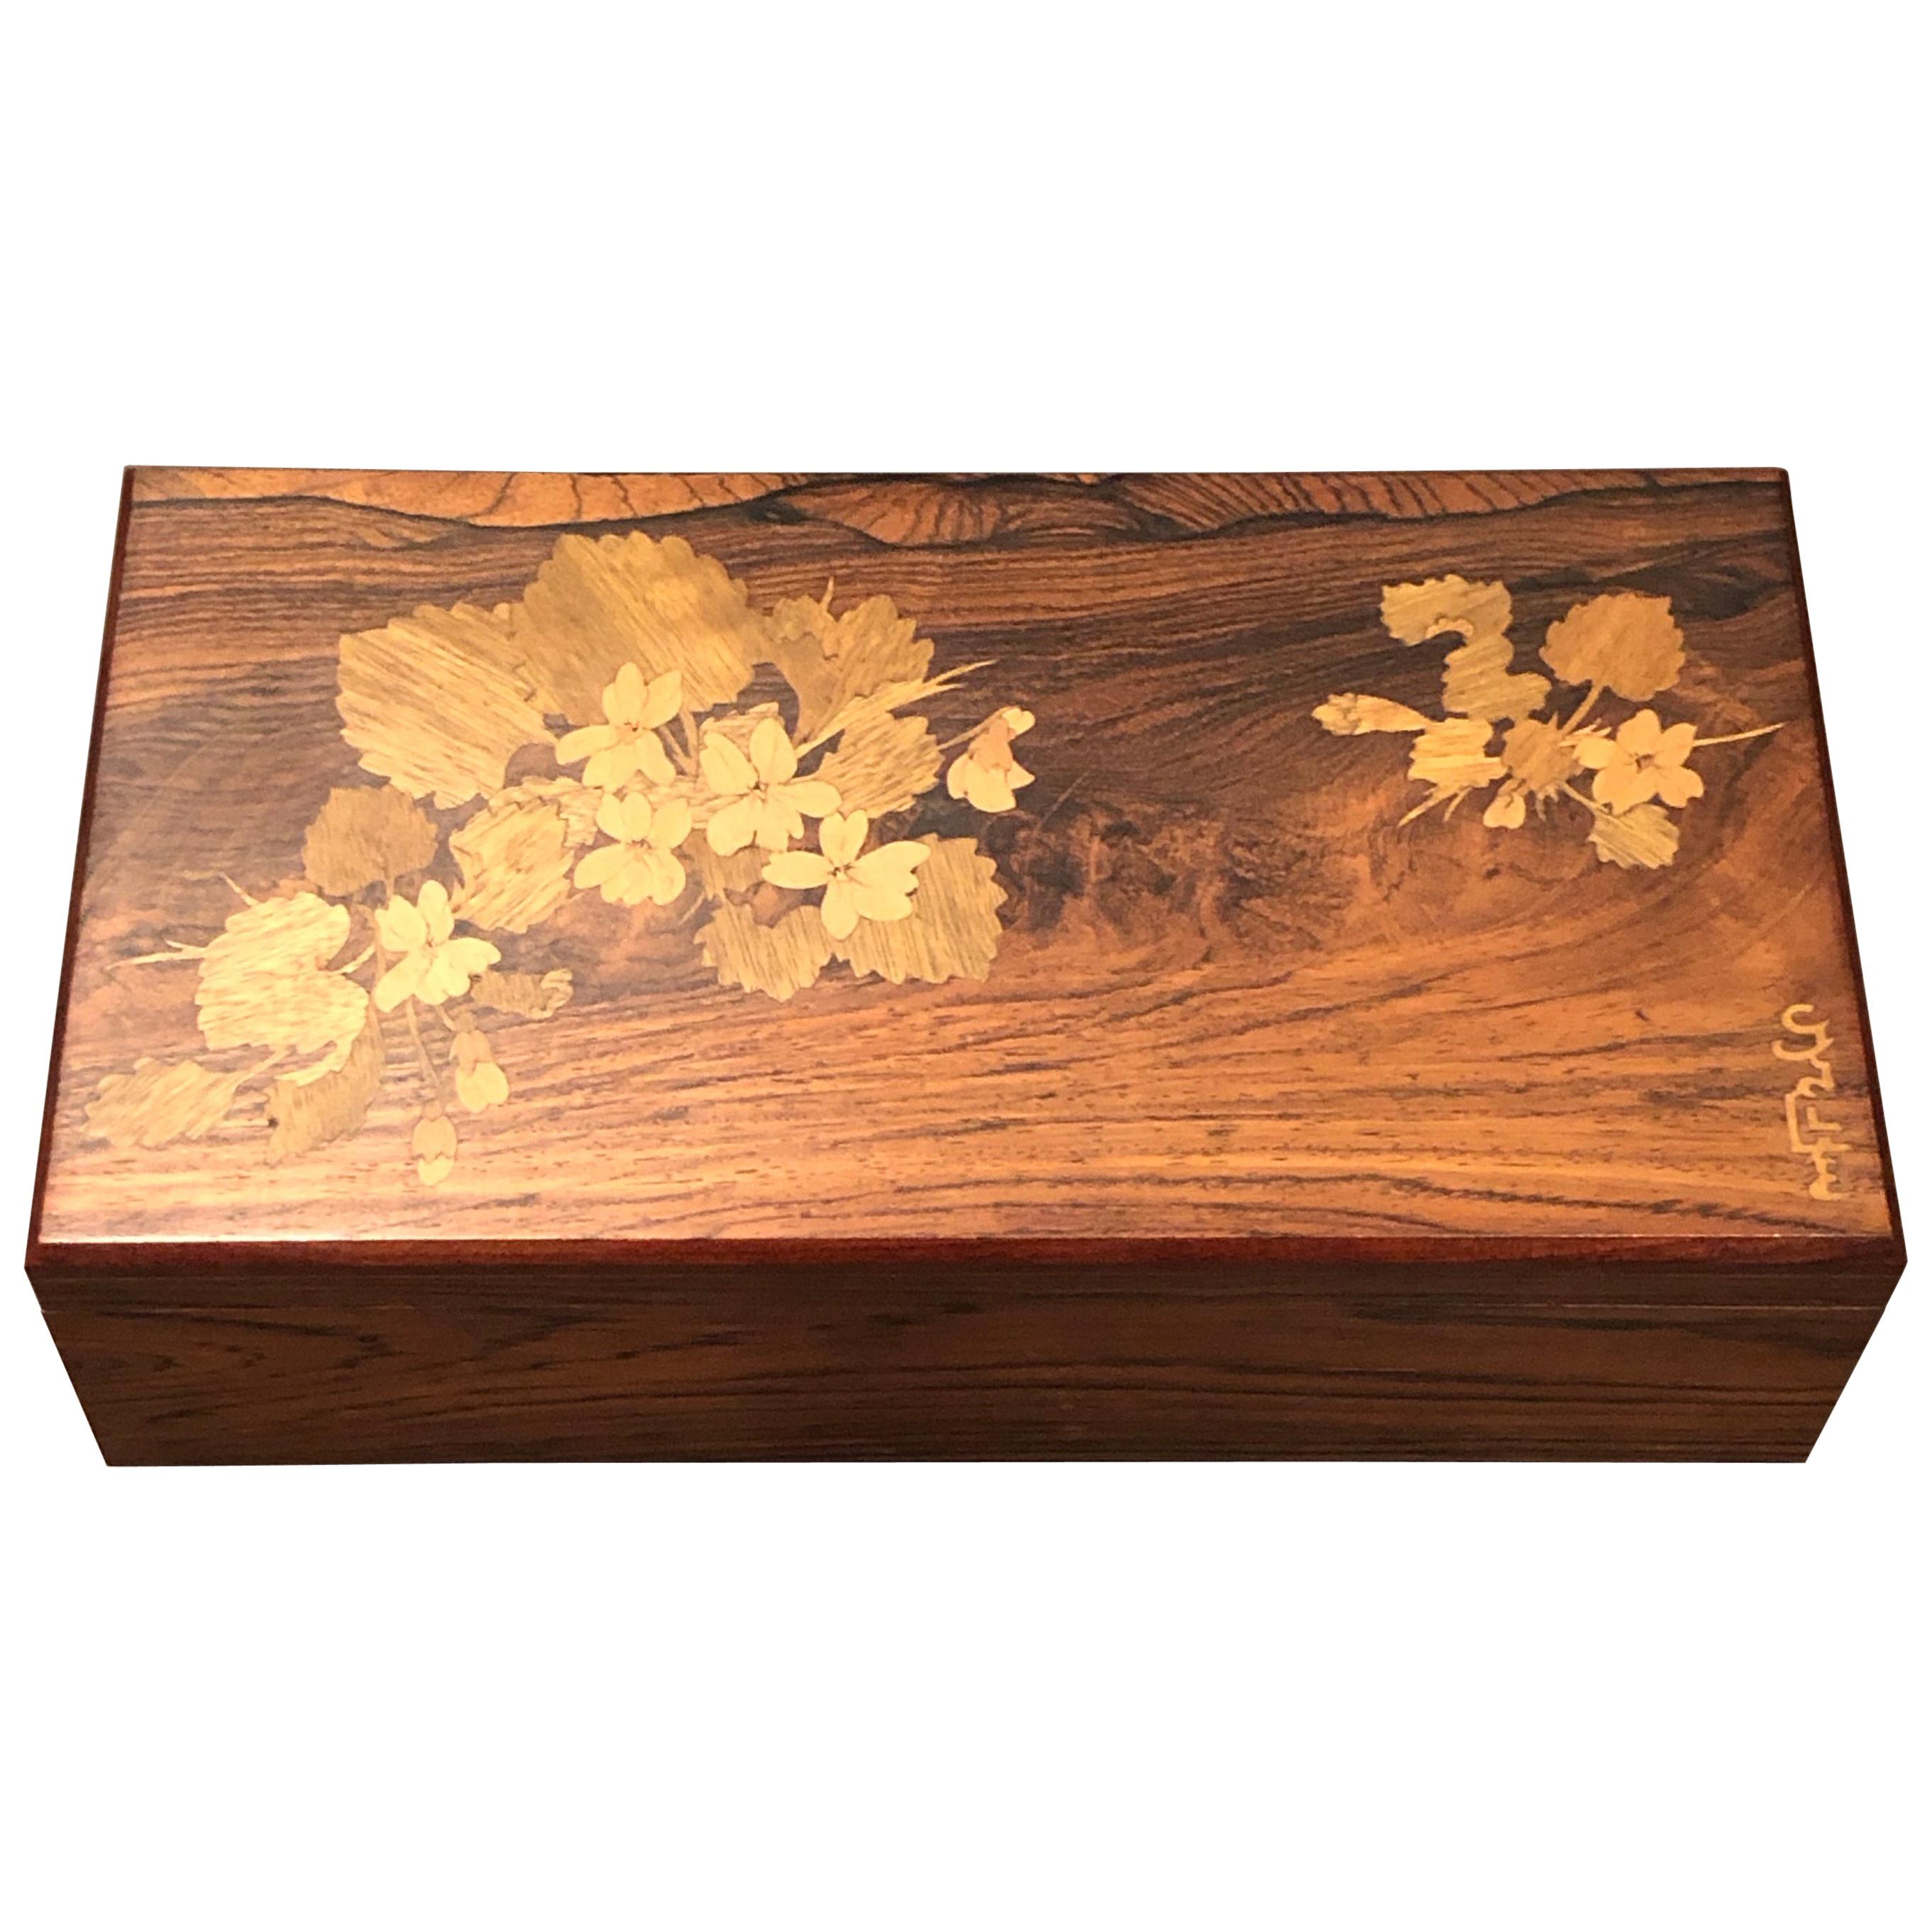 1920 Emile Galle Wooden Box Flowers and Leaves Marquetry Wood